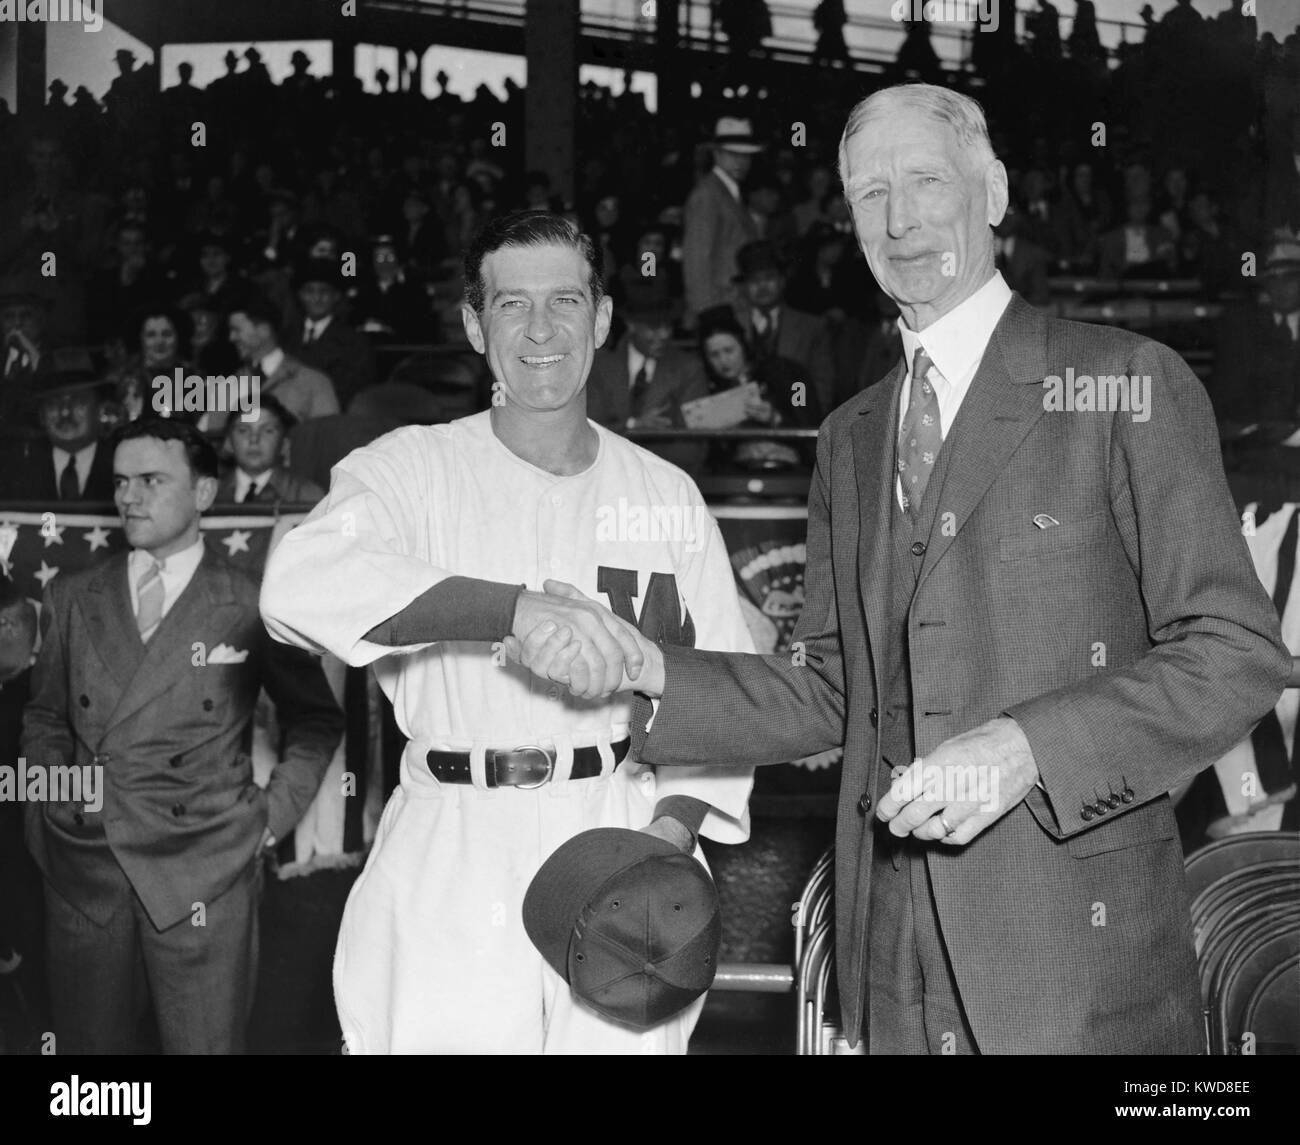 Baseball Managers Bucky Harris (left) and Connie Mack, April 18, 1938. They were at the season opener at Griffith Stadium between the Washington Senators and Mack's Philadelphia Athletics. (BSLOC 2015 17 51) Stock Photo